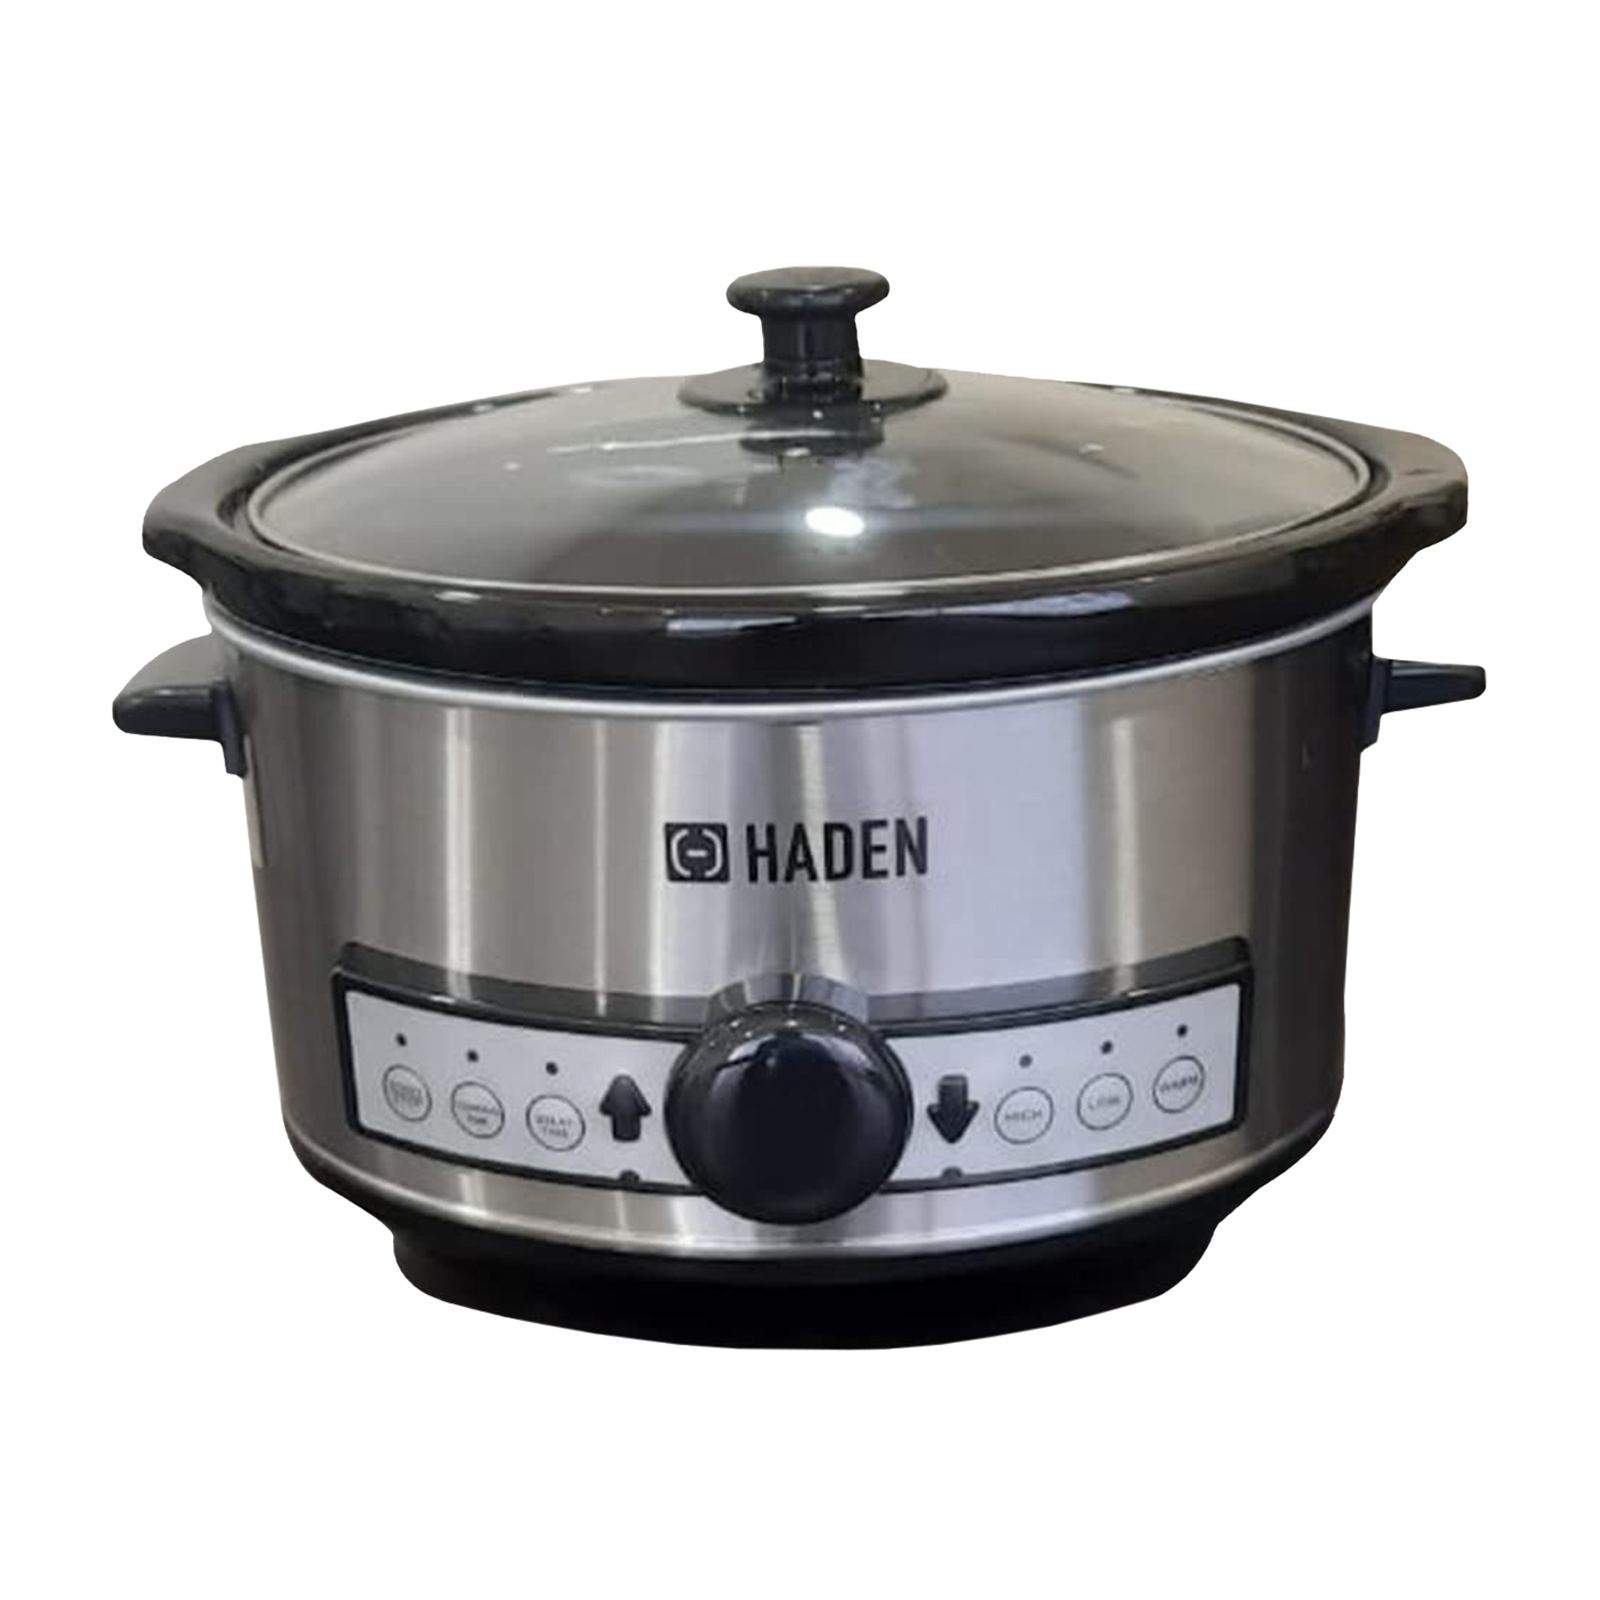 Haden 3.5 Litres Electric Slow Cooker (3 Settings, Silver)